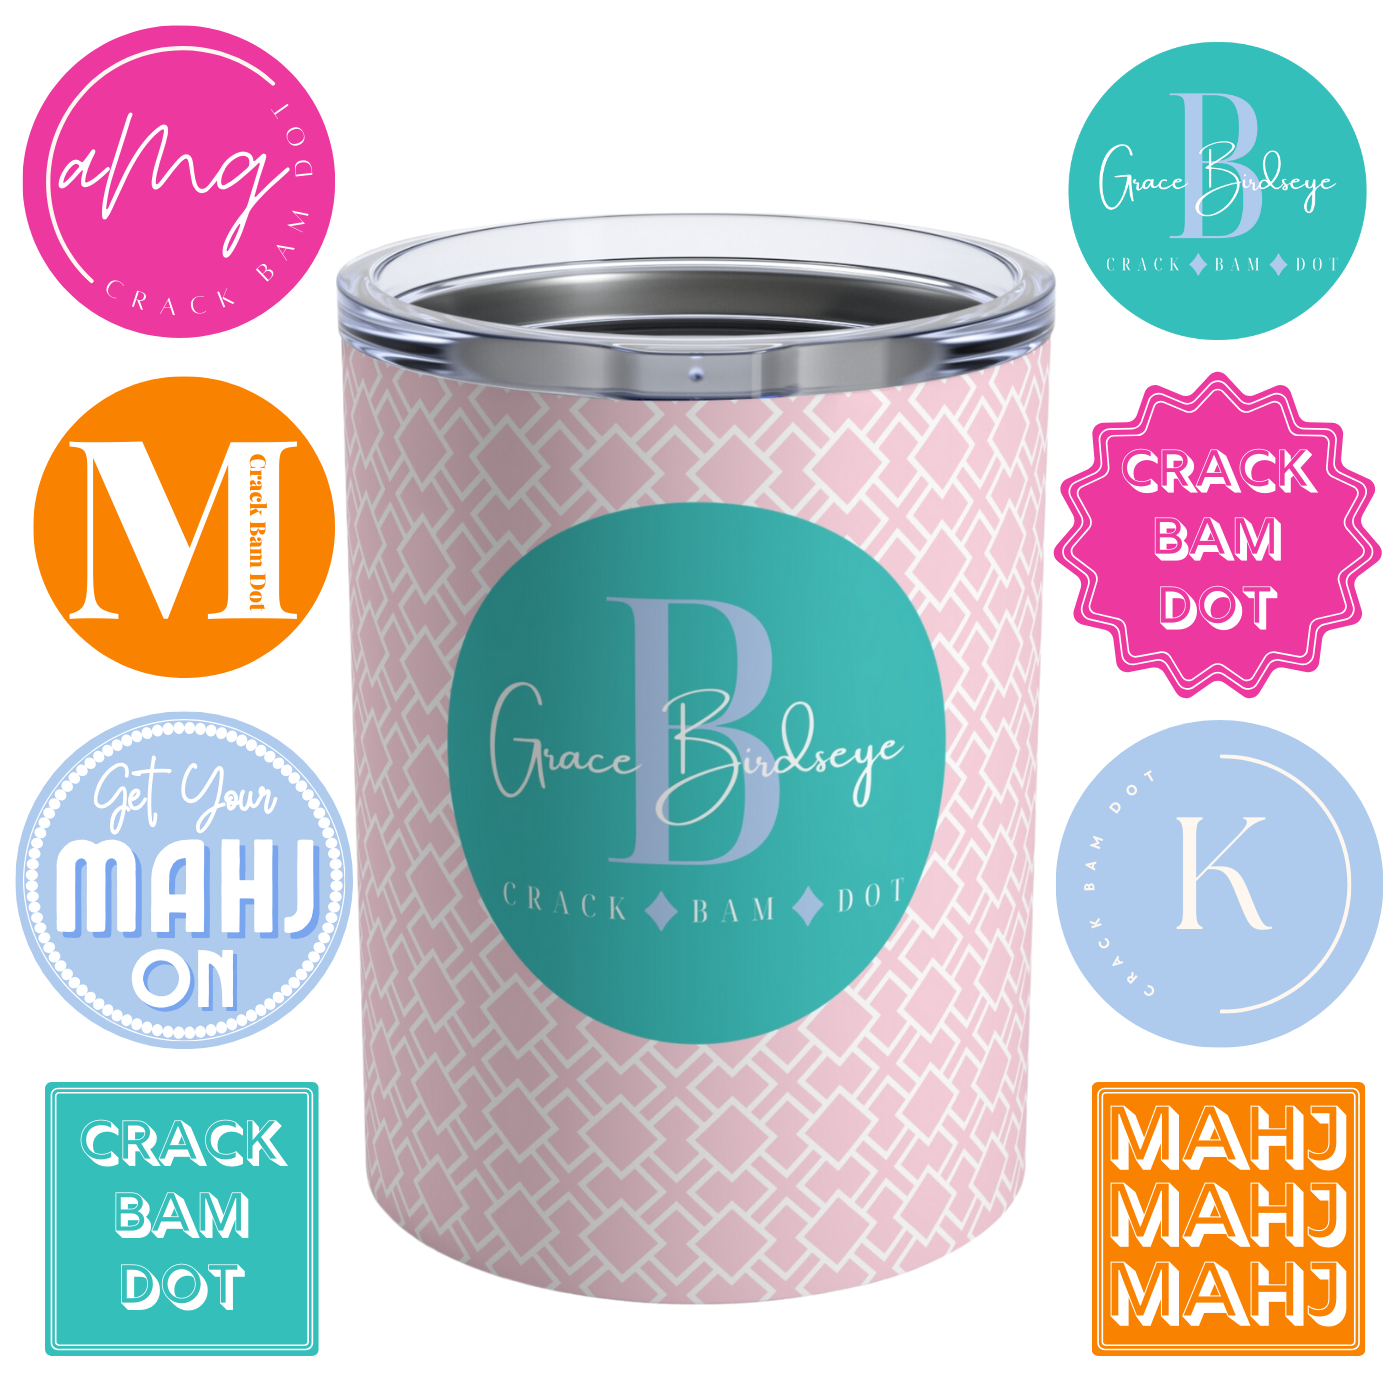 Personalized and Custom Colorful Mahjong Tumbler with Mahjongg tiles Great Gift for Mahj Game Party or Player- Unique Modern Design Pink Blue Green Orange Options for Mah Jongg Cups for Drinks and Cocktails